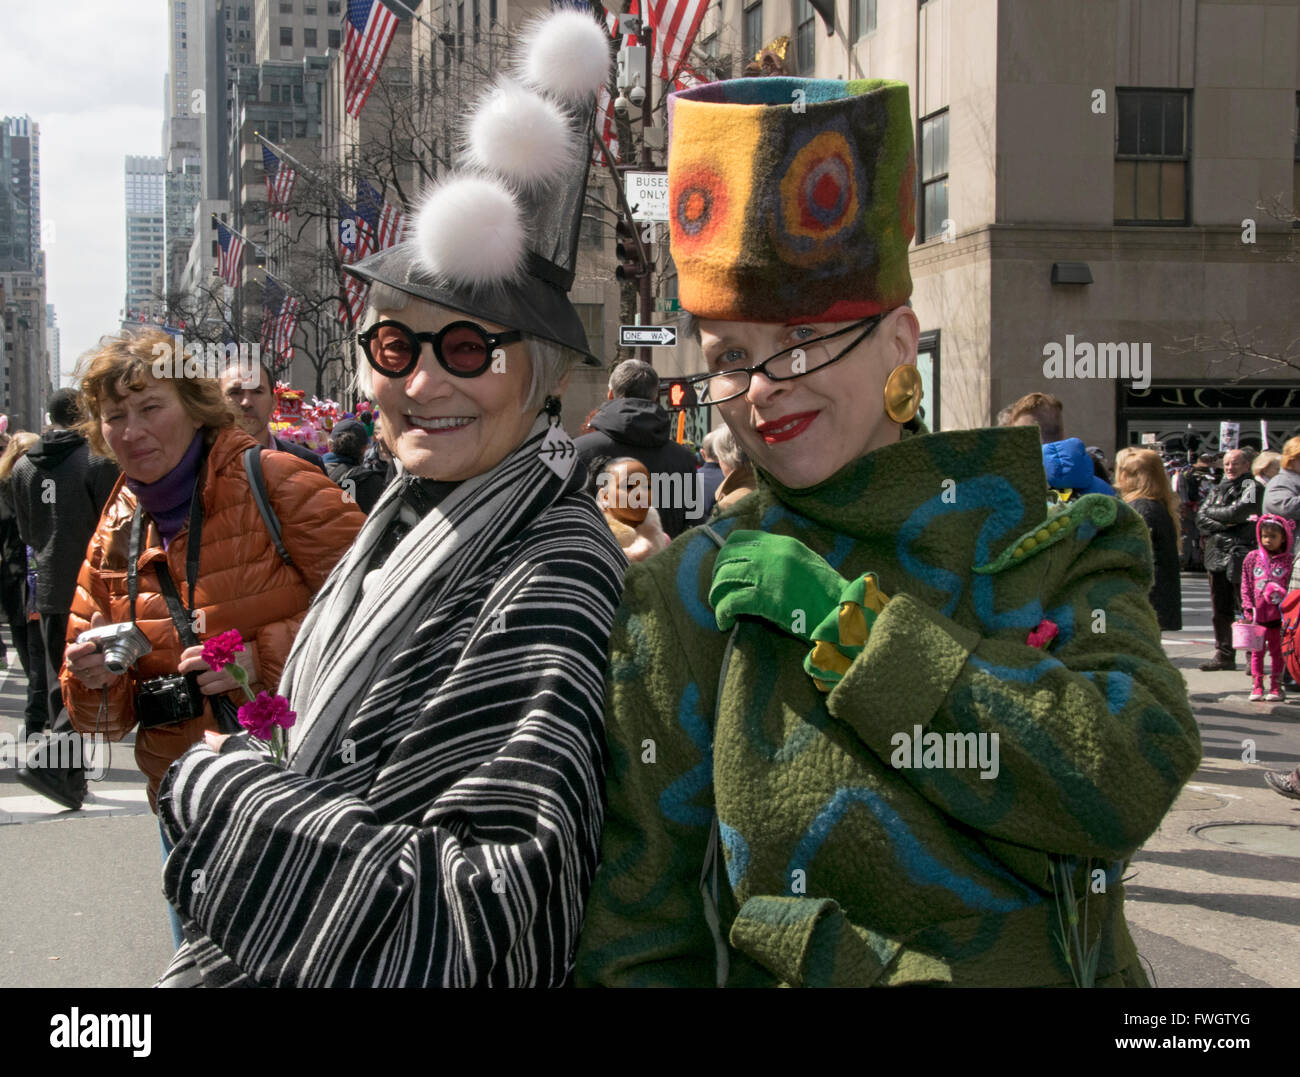 Two older women fashion bloggers in eccentric hats on Fifth avenue in Midtown Manhattan New York City, Stock Photo